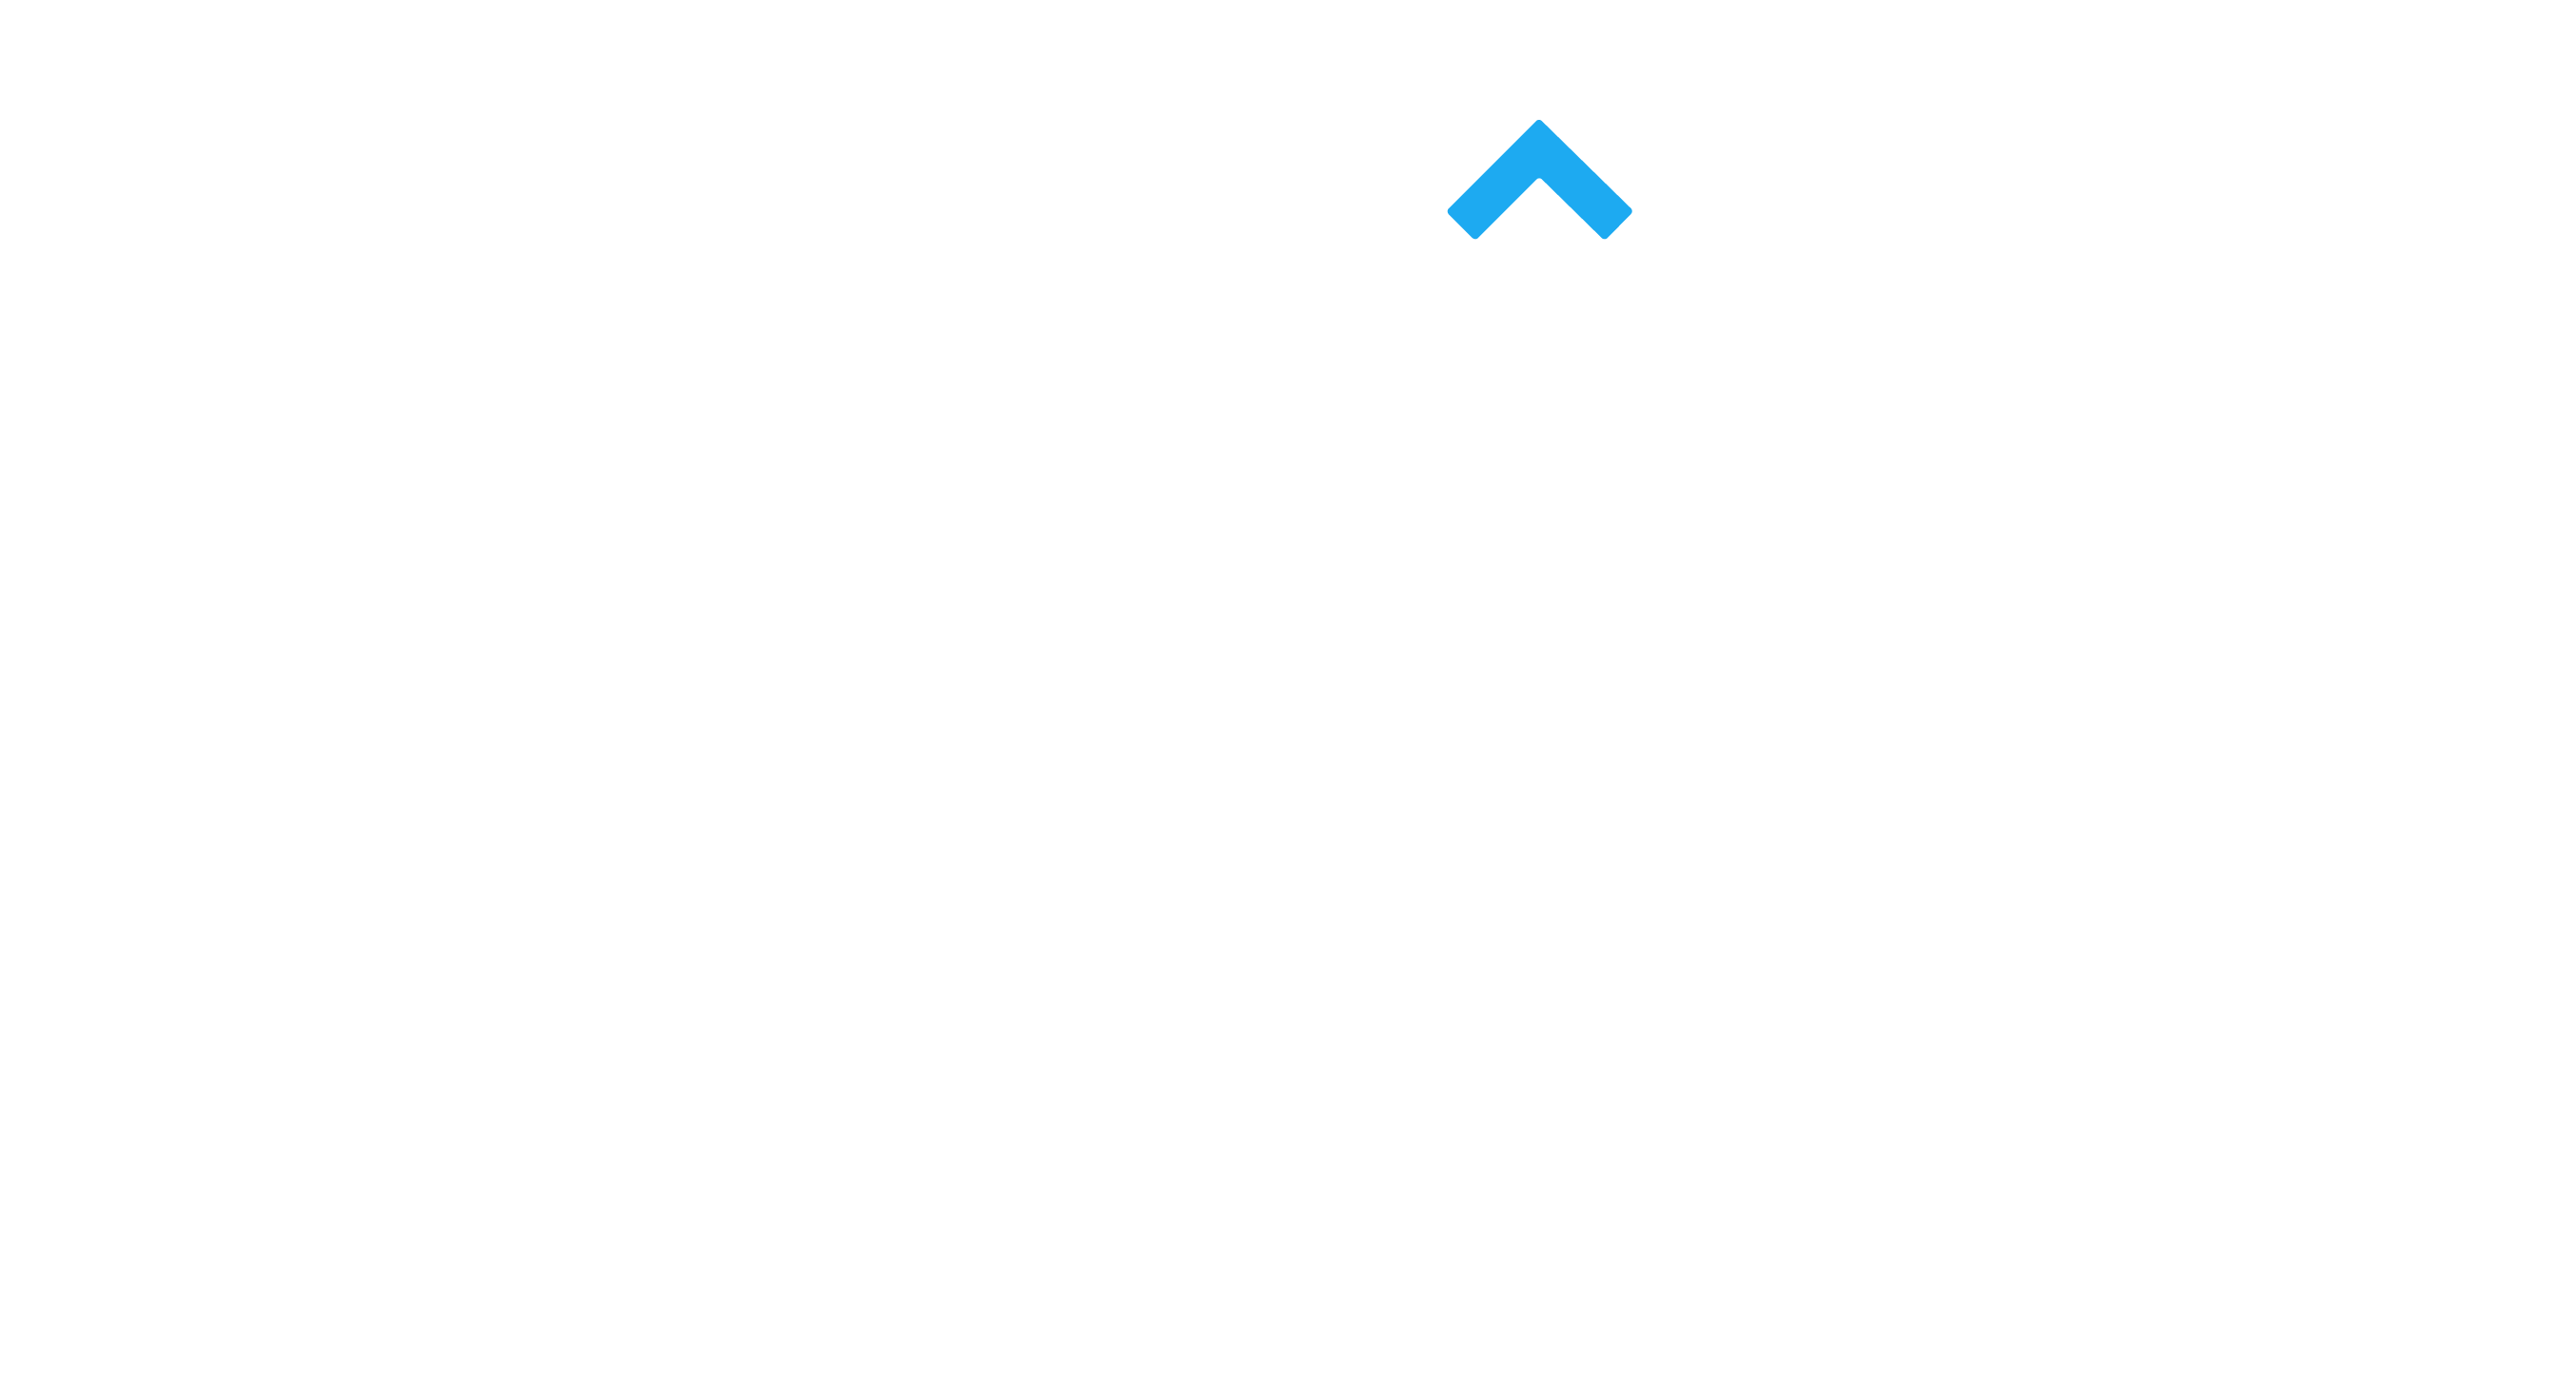 Learning without border